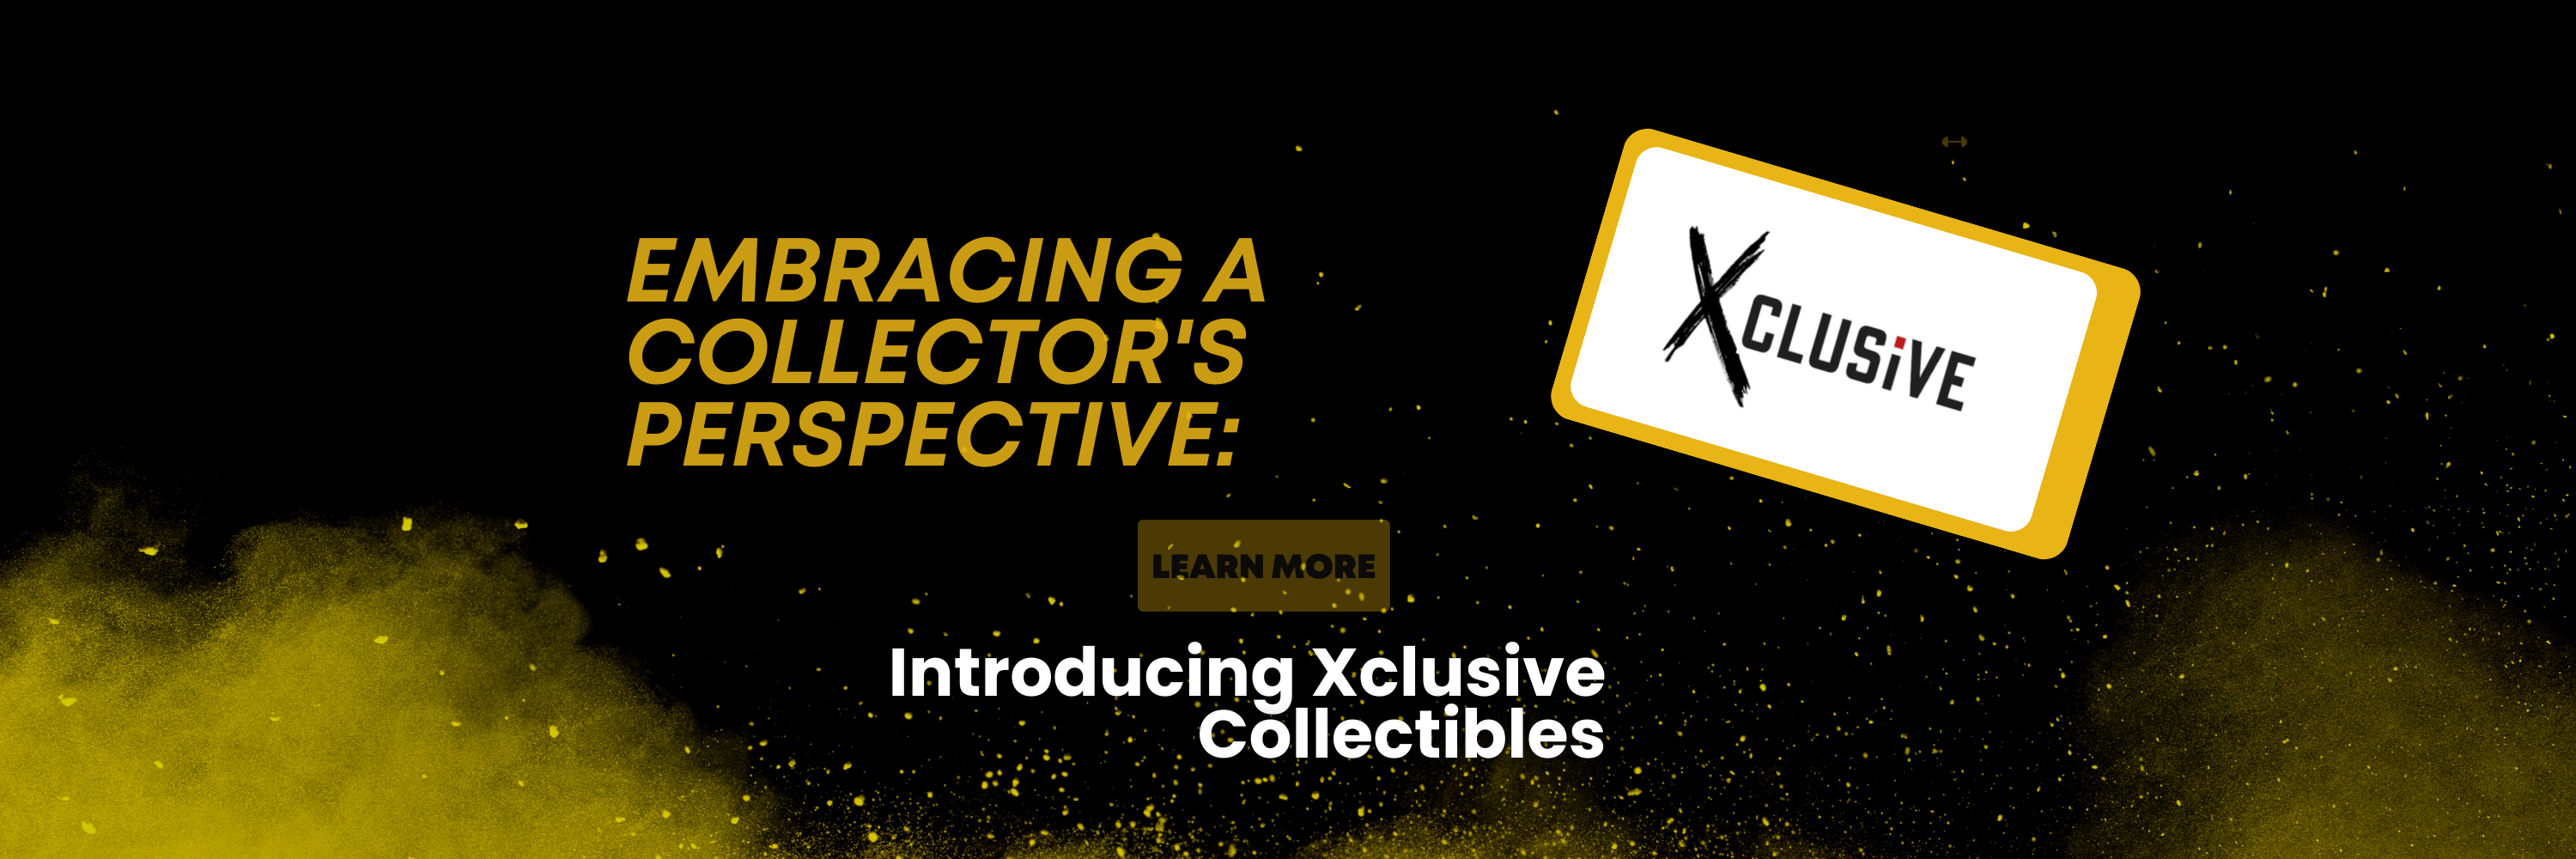 Introducing Xclusive Collectibles